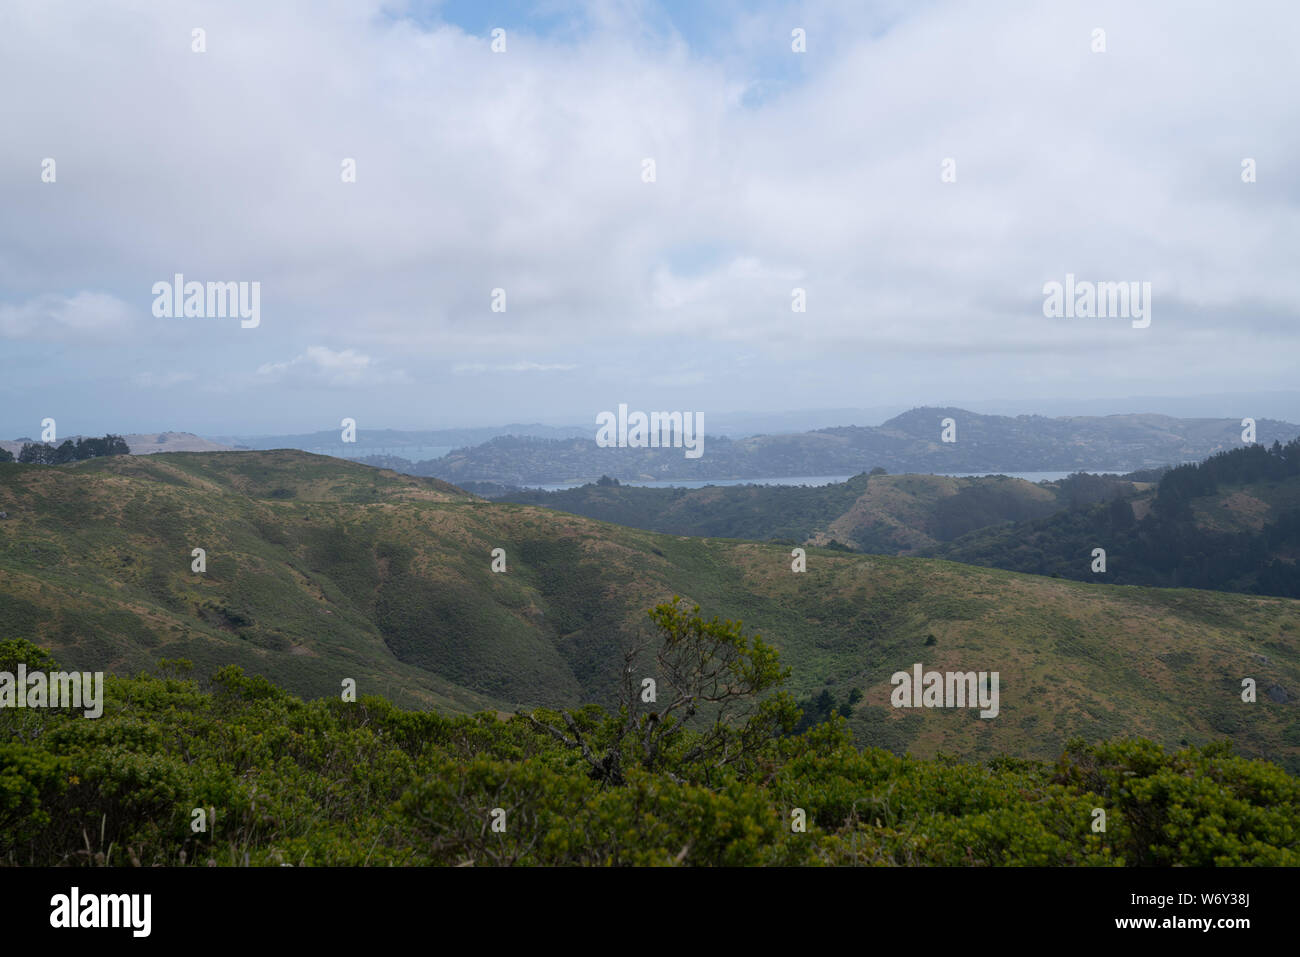 Green hills with body of water and cloudy overcast sky Stock Photo